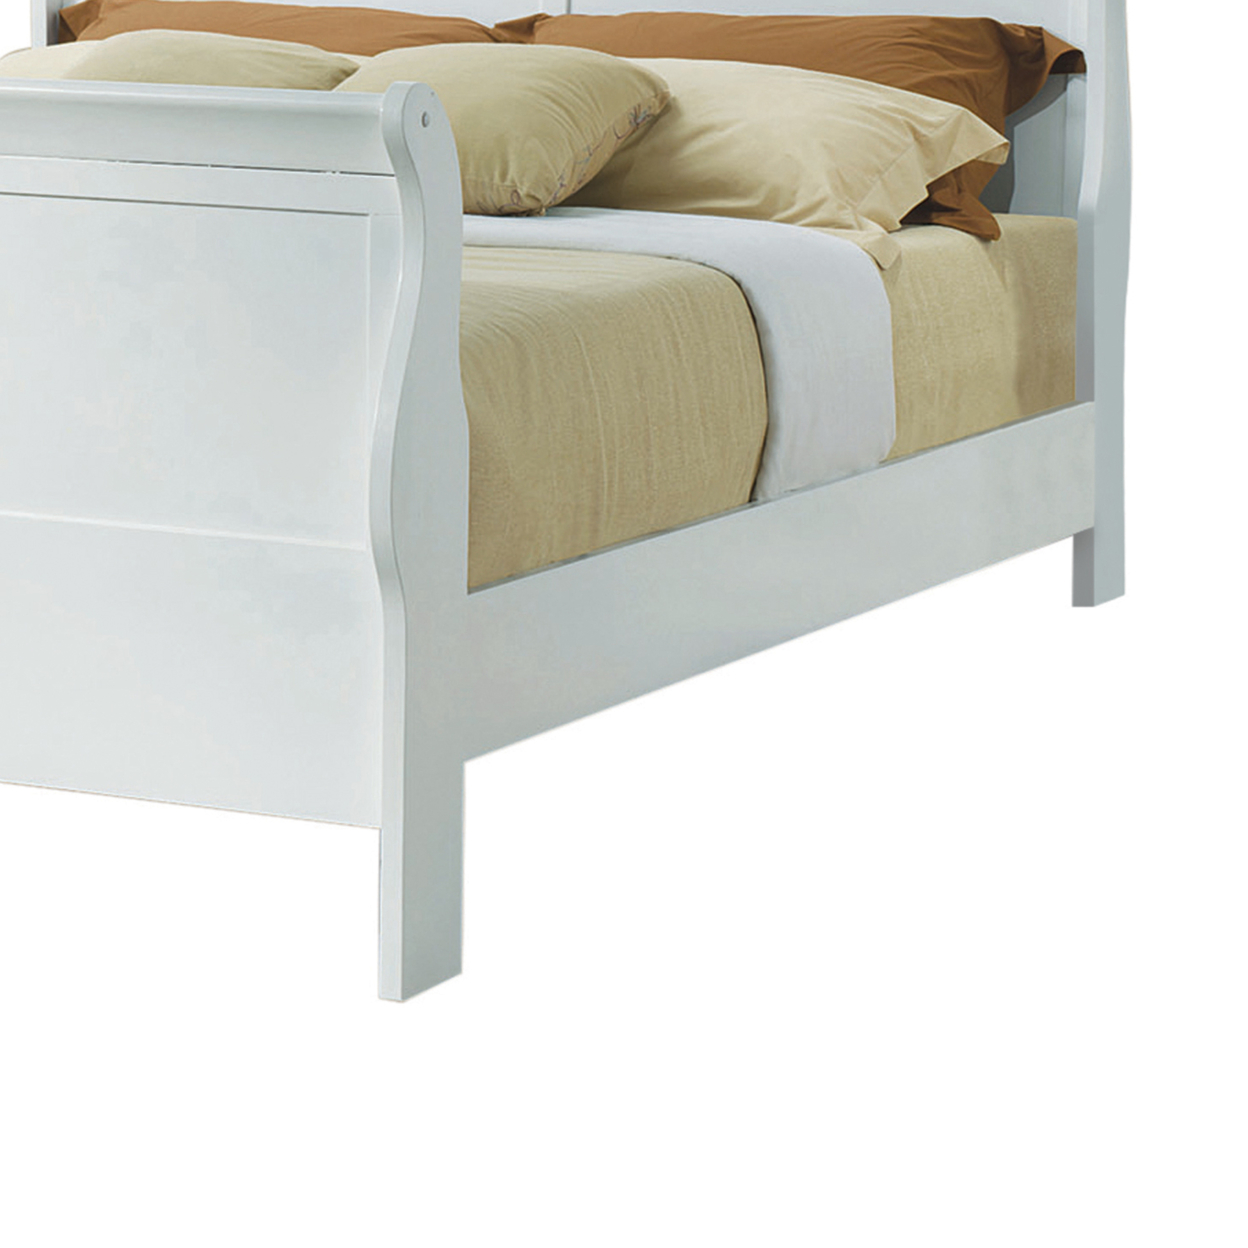 Traditional Style Full Size Wooden Bed With Bevelled Edges, White- Saltoro Sherpi